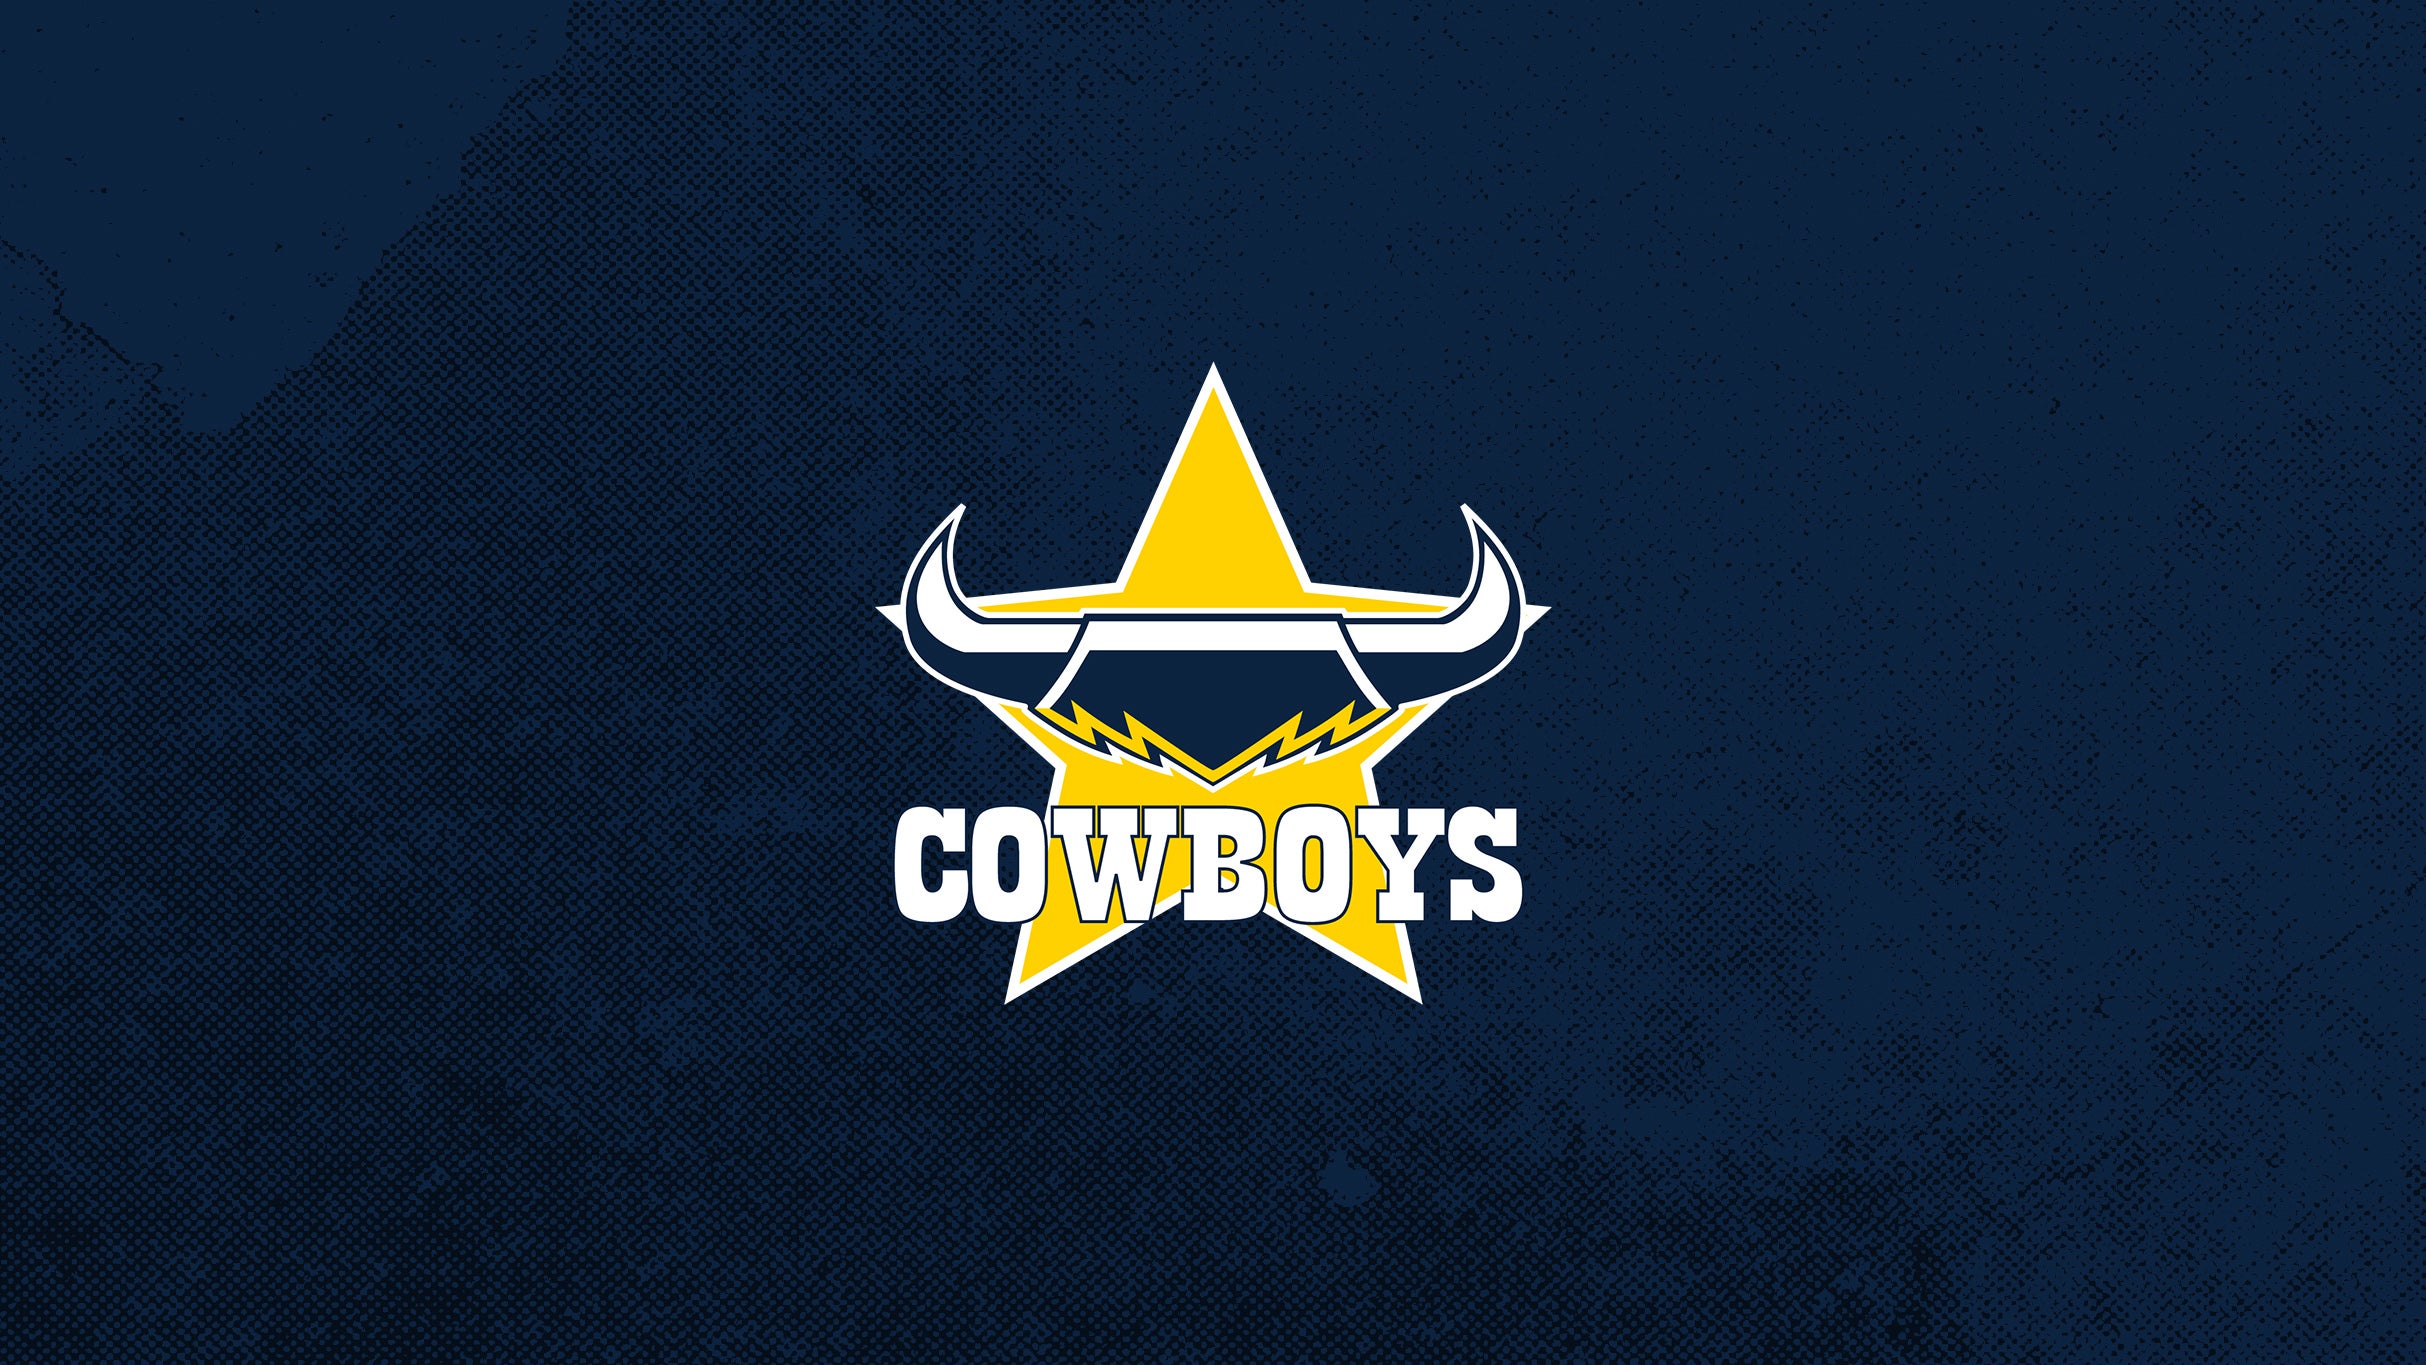 North Queensland Toyota Cowboys v Parramatta Eels (Round 21) in Townsville promo photo for Cowboys Members presale offer code